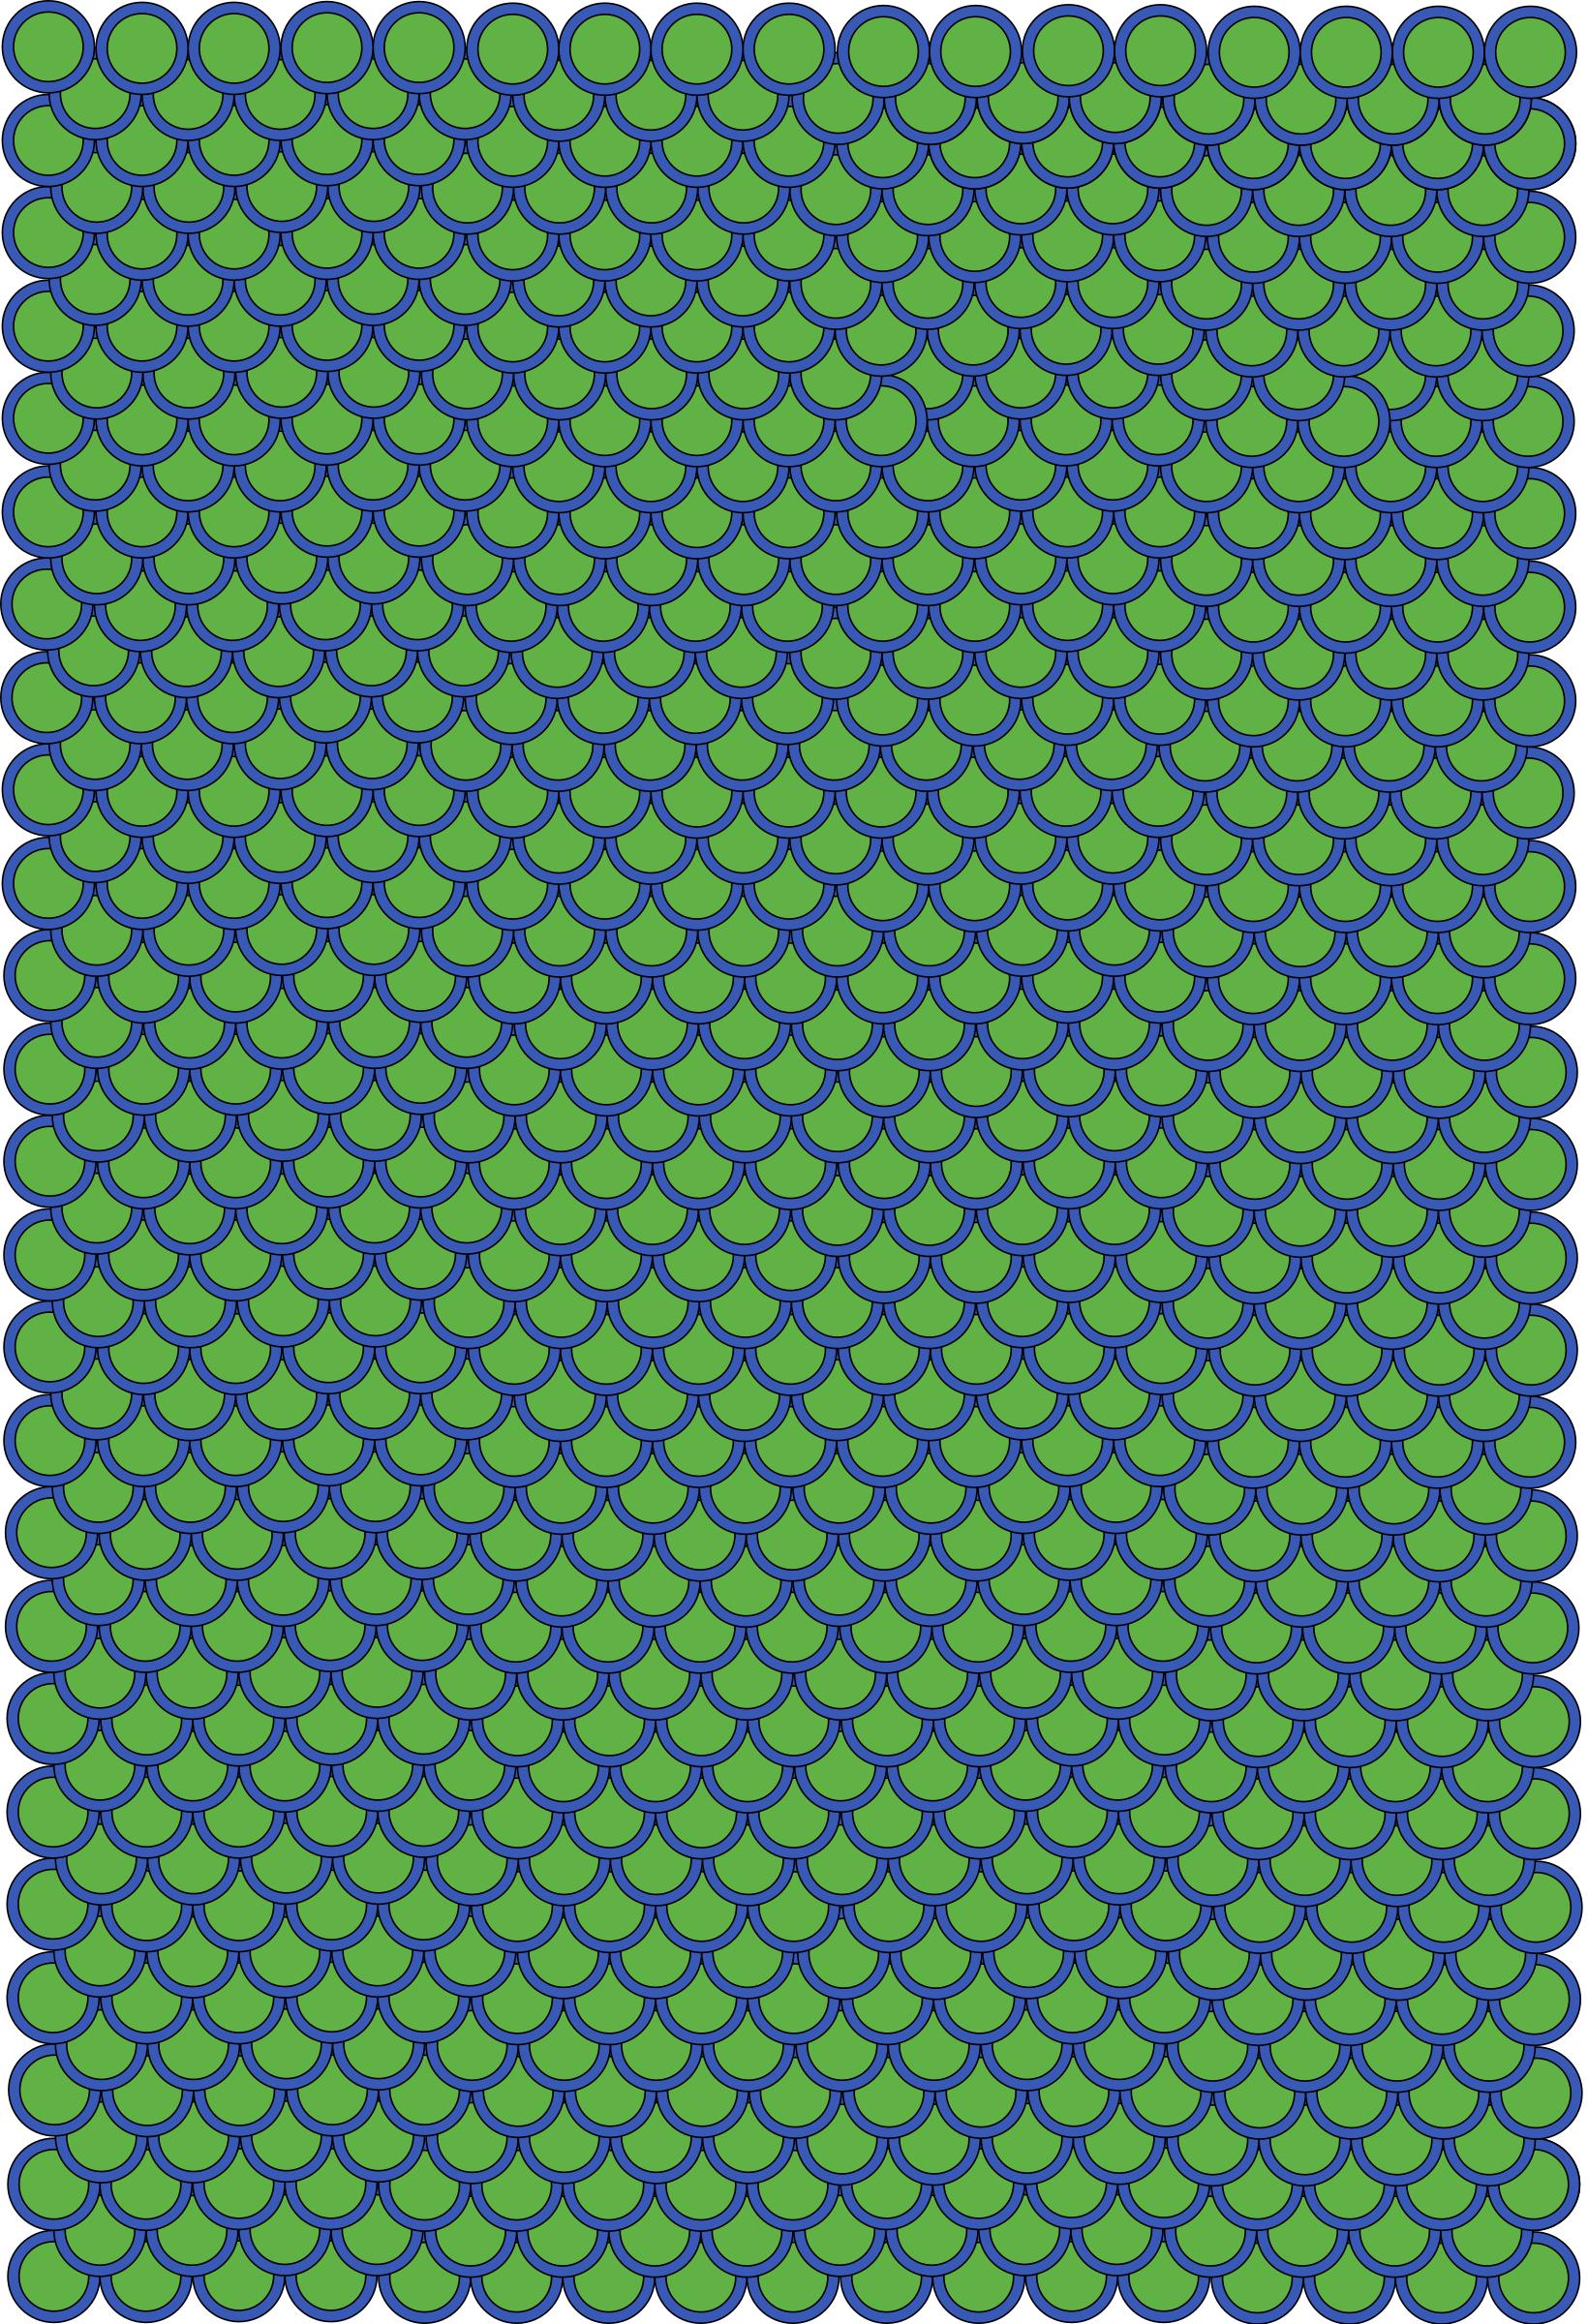 More Fish Scales png